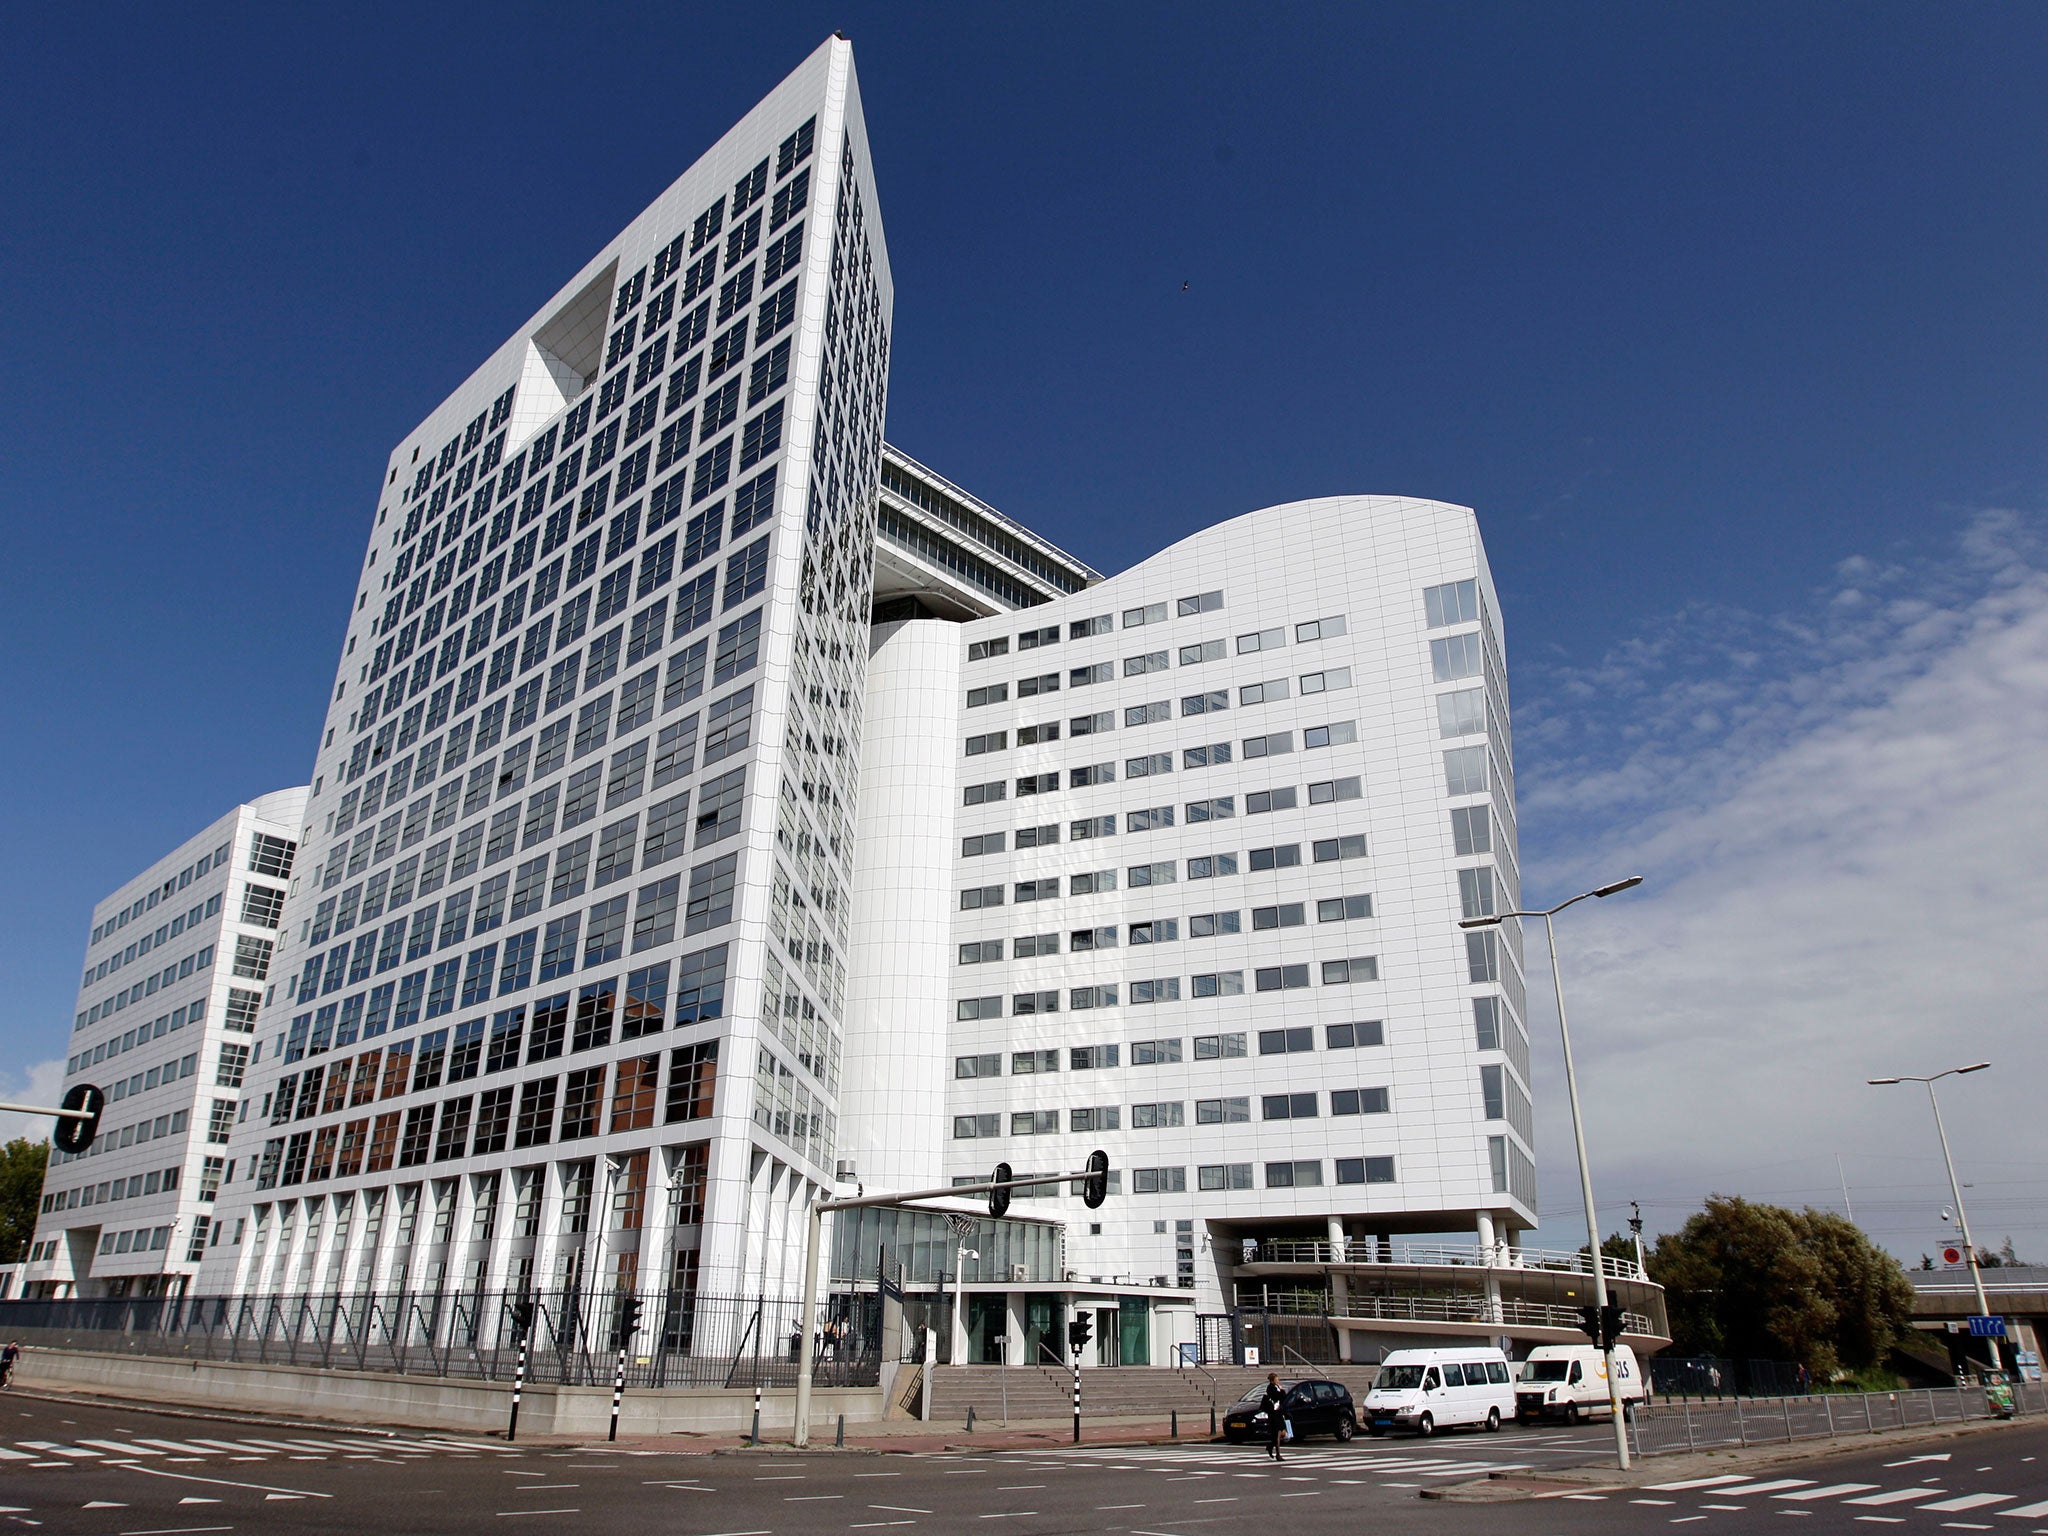 The International Criminal Court's building (ICC) in The Hague